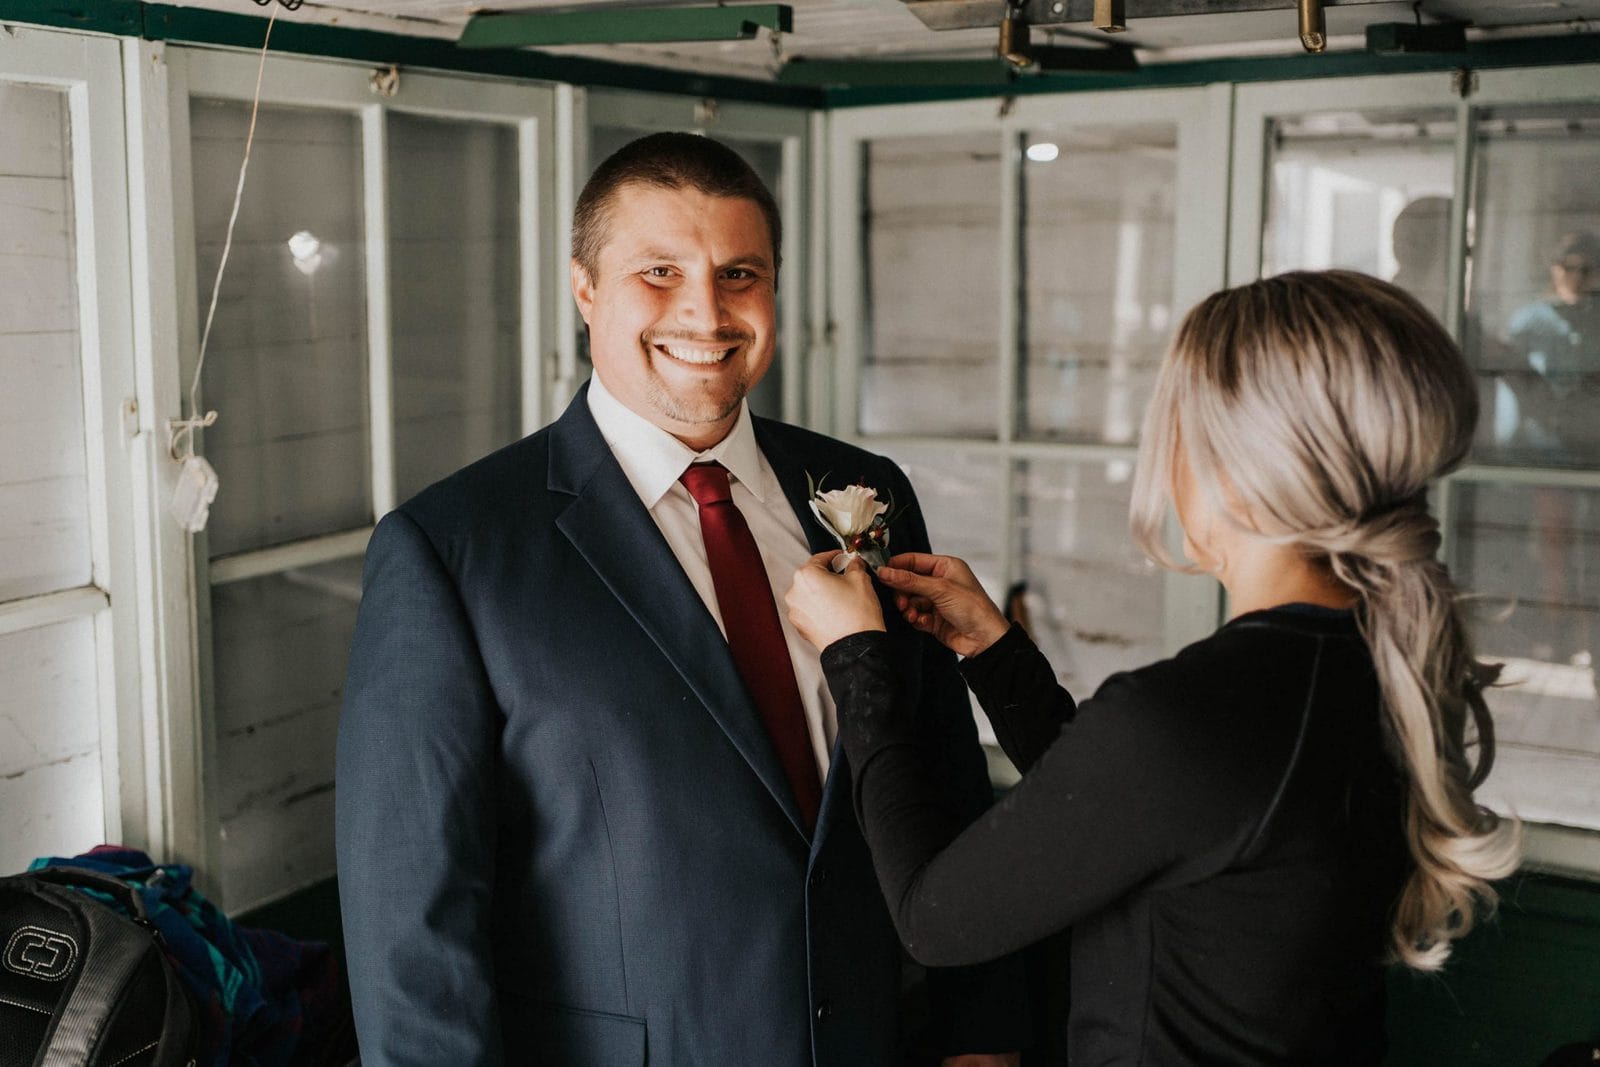 bride helping groom with his boutonnière